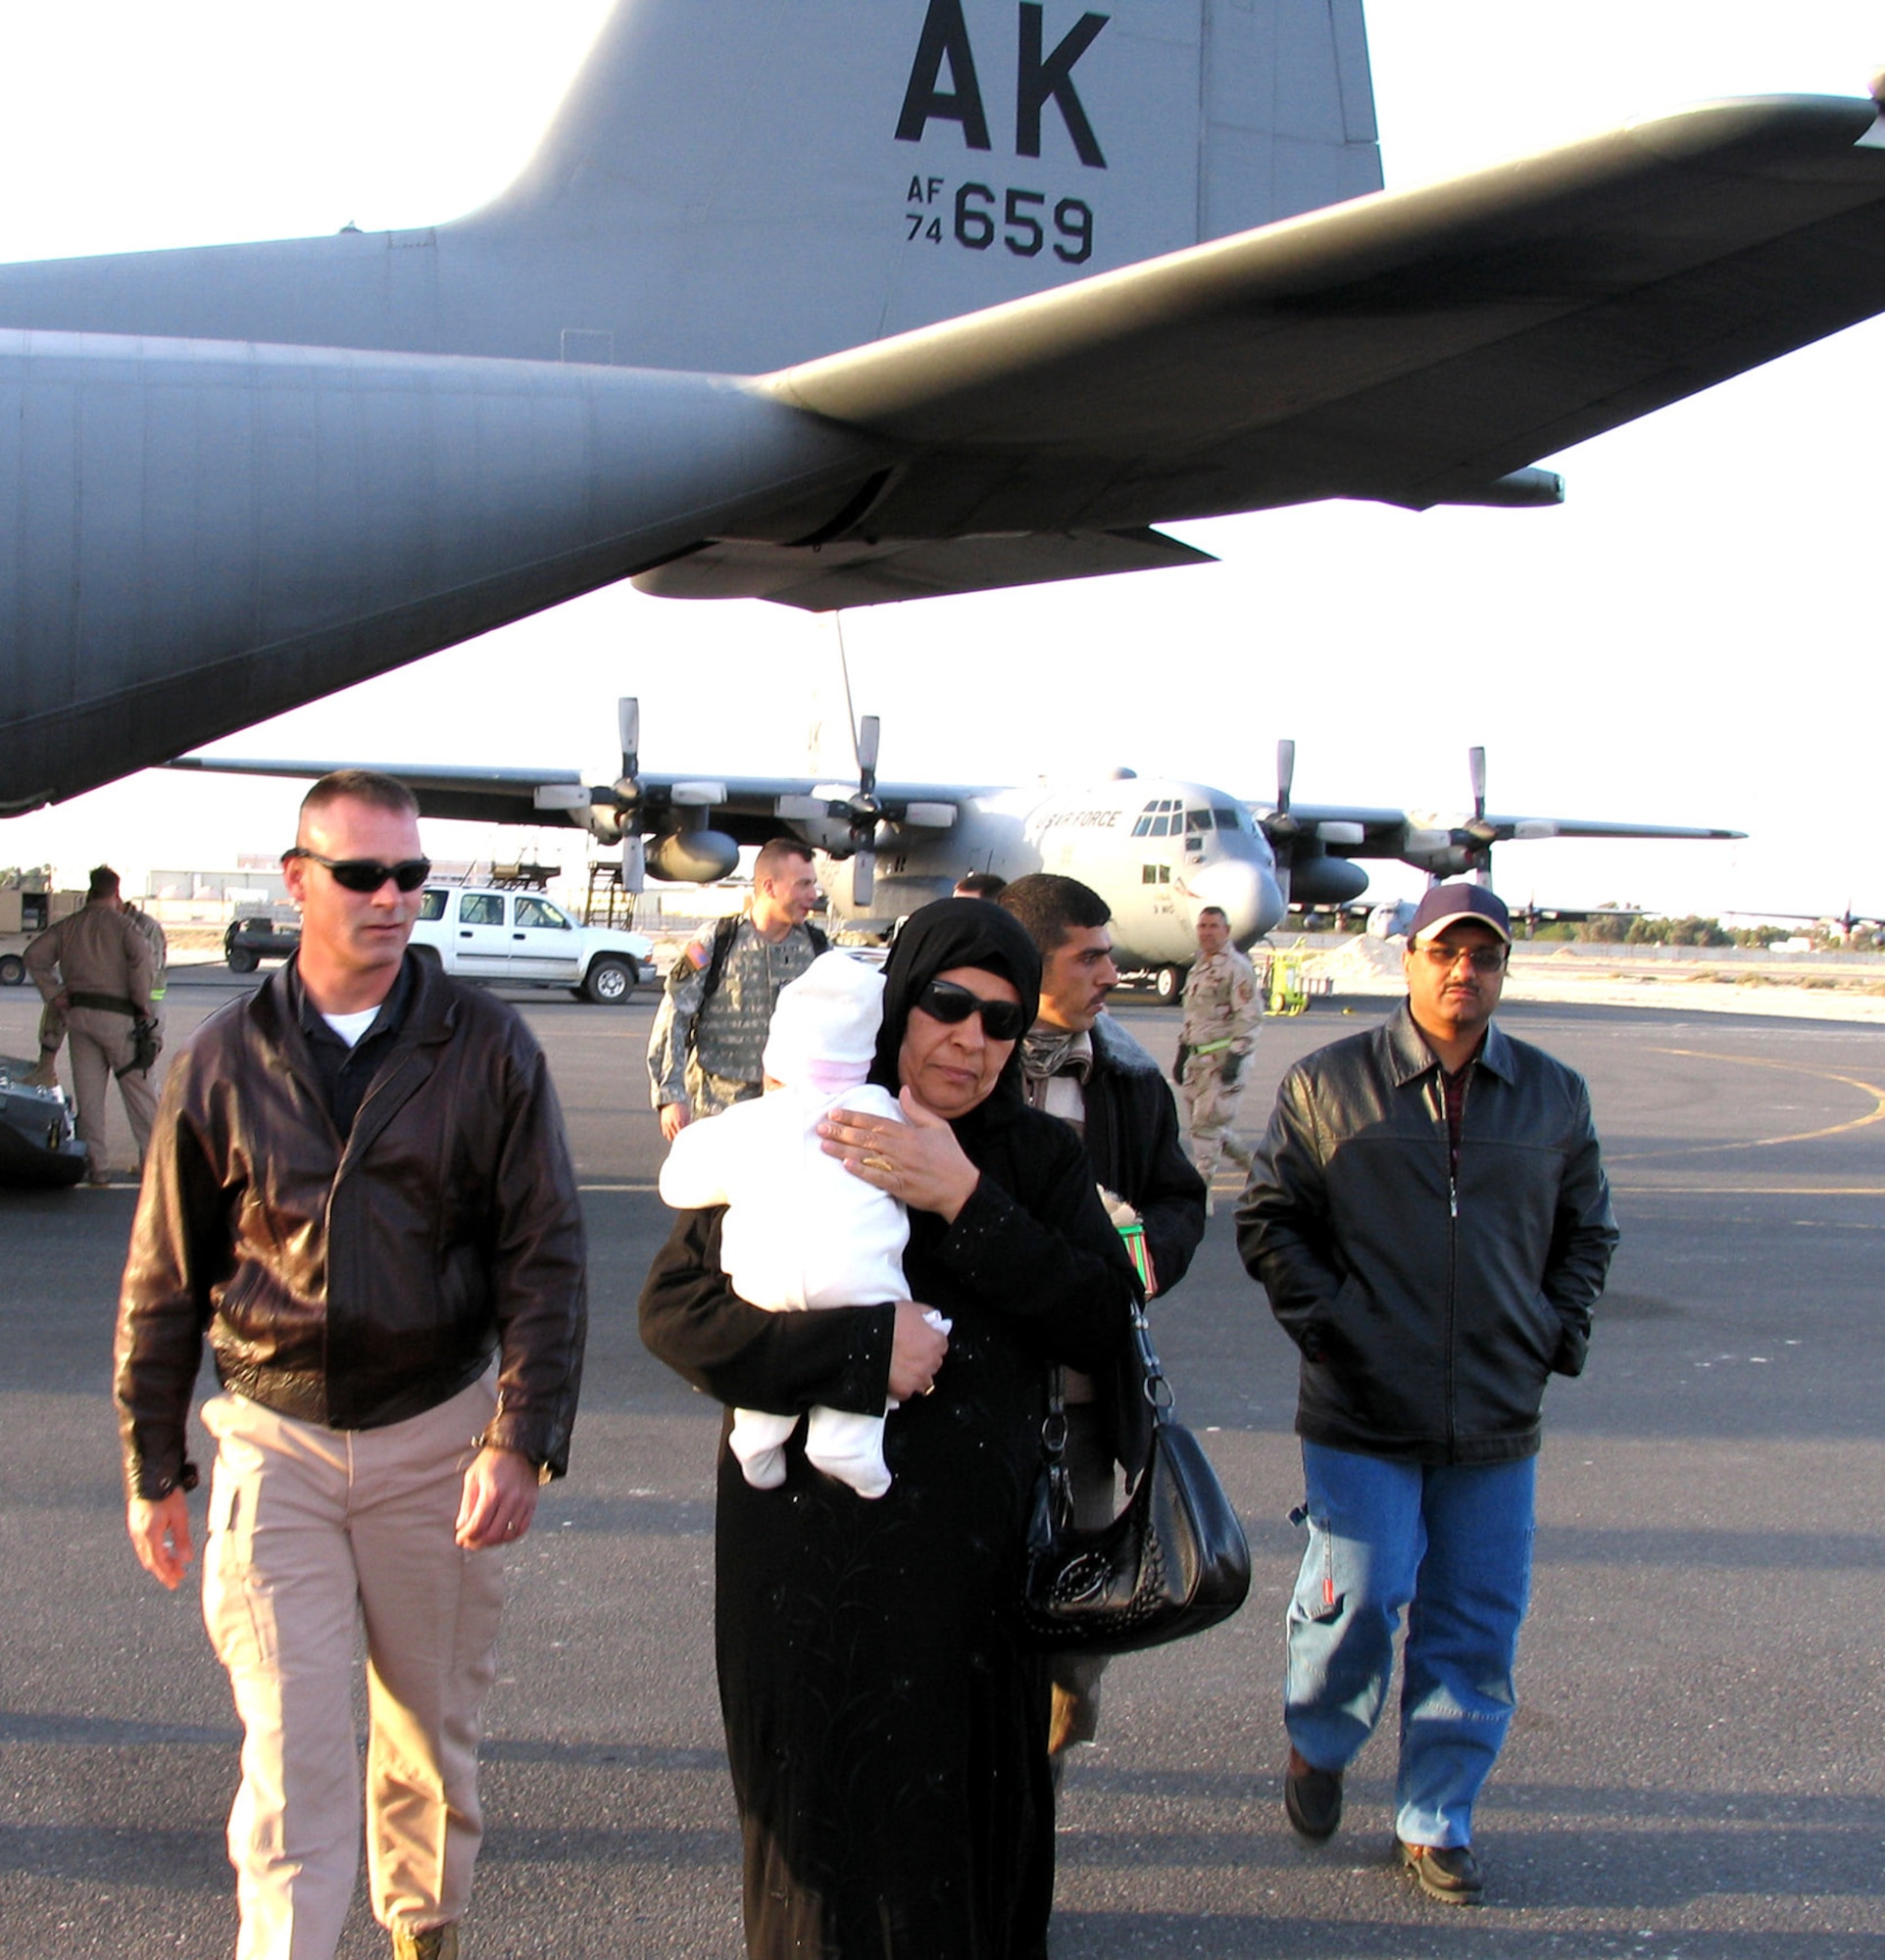 SOUTHWEST ASIA (AFPN) -- Baby Noor's grandmother and father take the infant, who has spina bifeda, from a 386th Air Expeditionary Wing C-130 Hercules to awaiting transportation. Officials from the U.S. Embassy in Kuwait met the family and escorted them to a civilian airport, from where the Iraqi family will continue their journey to the United States. (U.S. Air Force photo by Tech. Sgt. Mark Getsy)